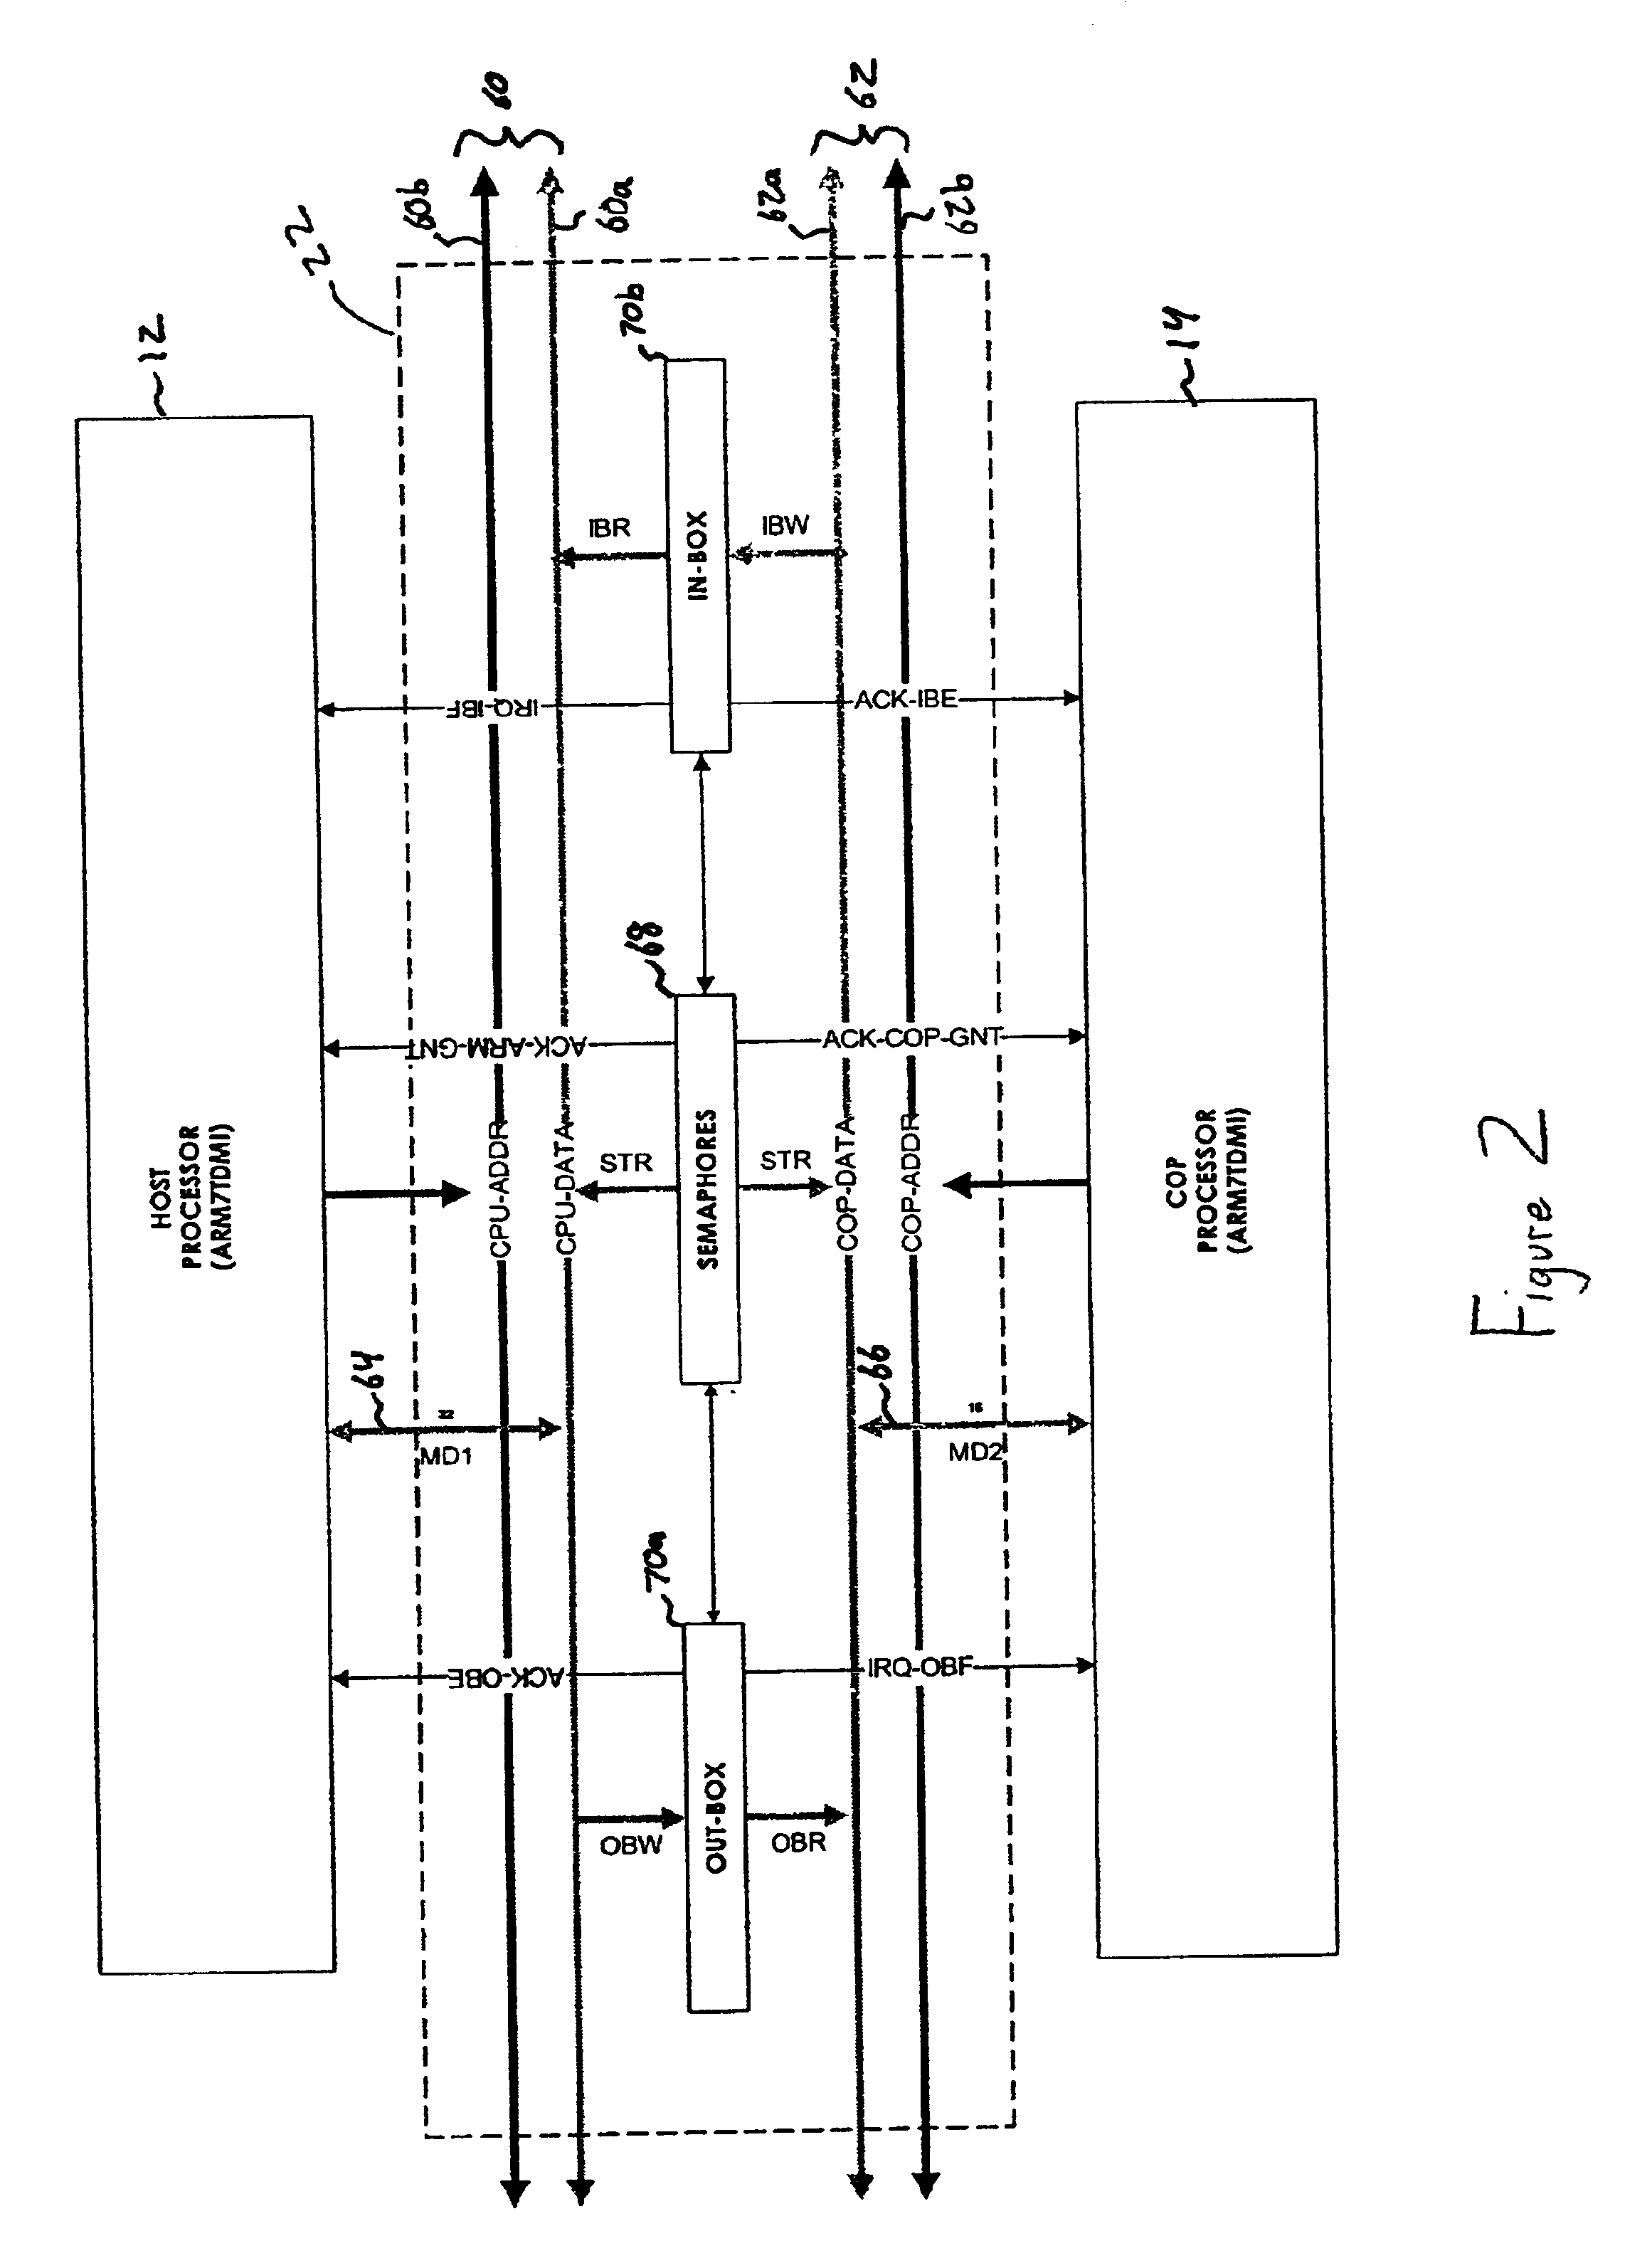 Multiprocessor communication system and method